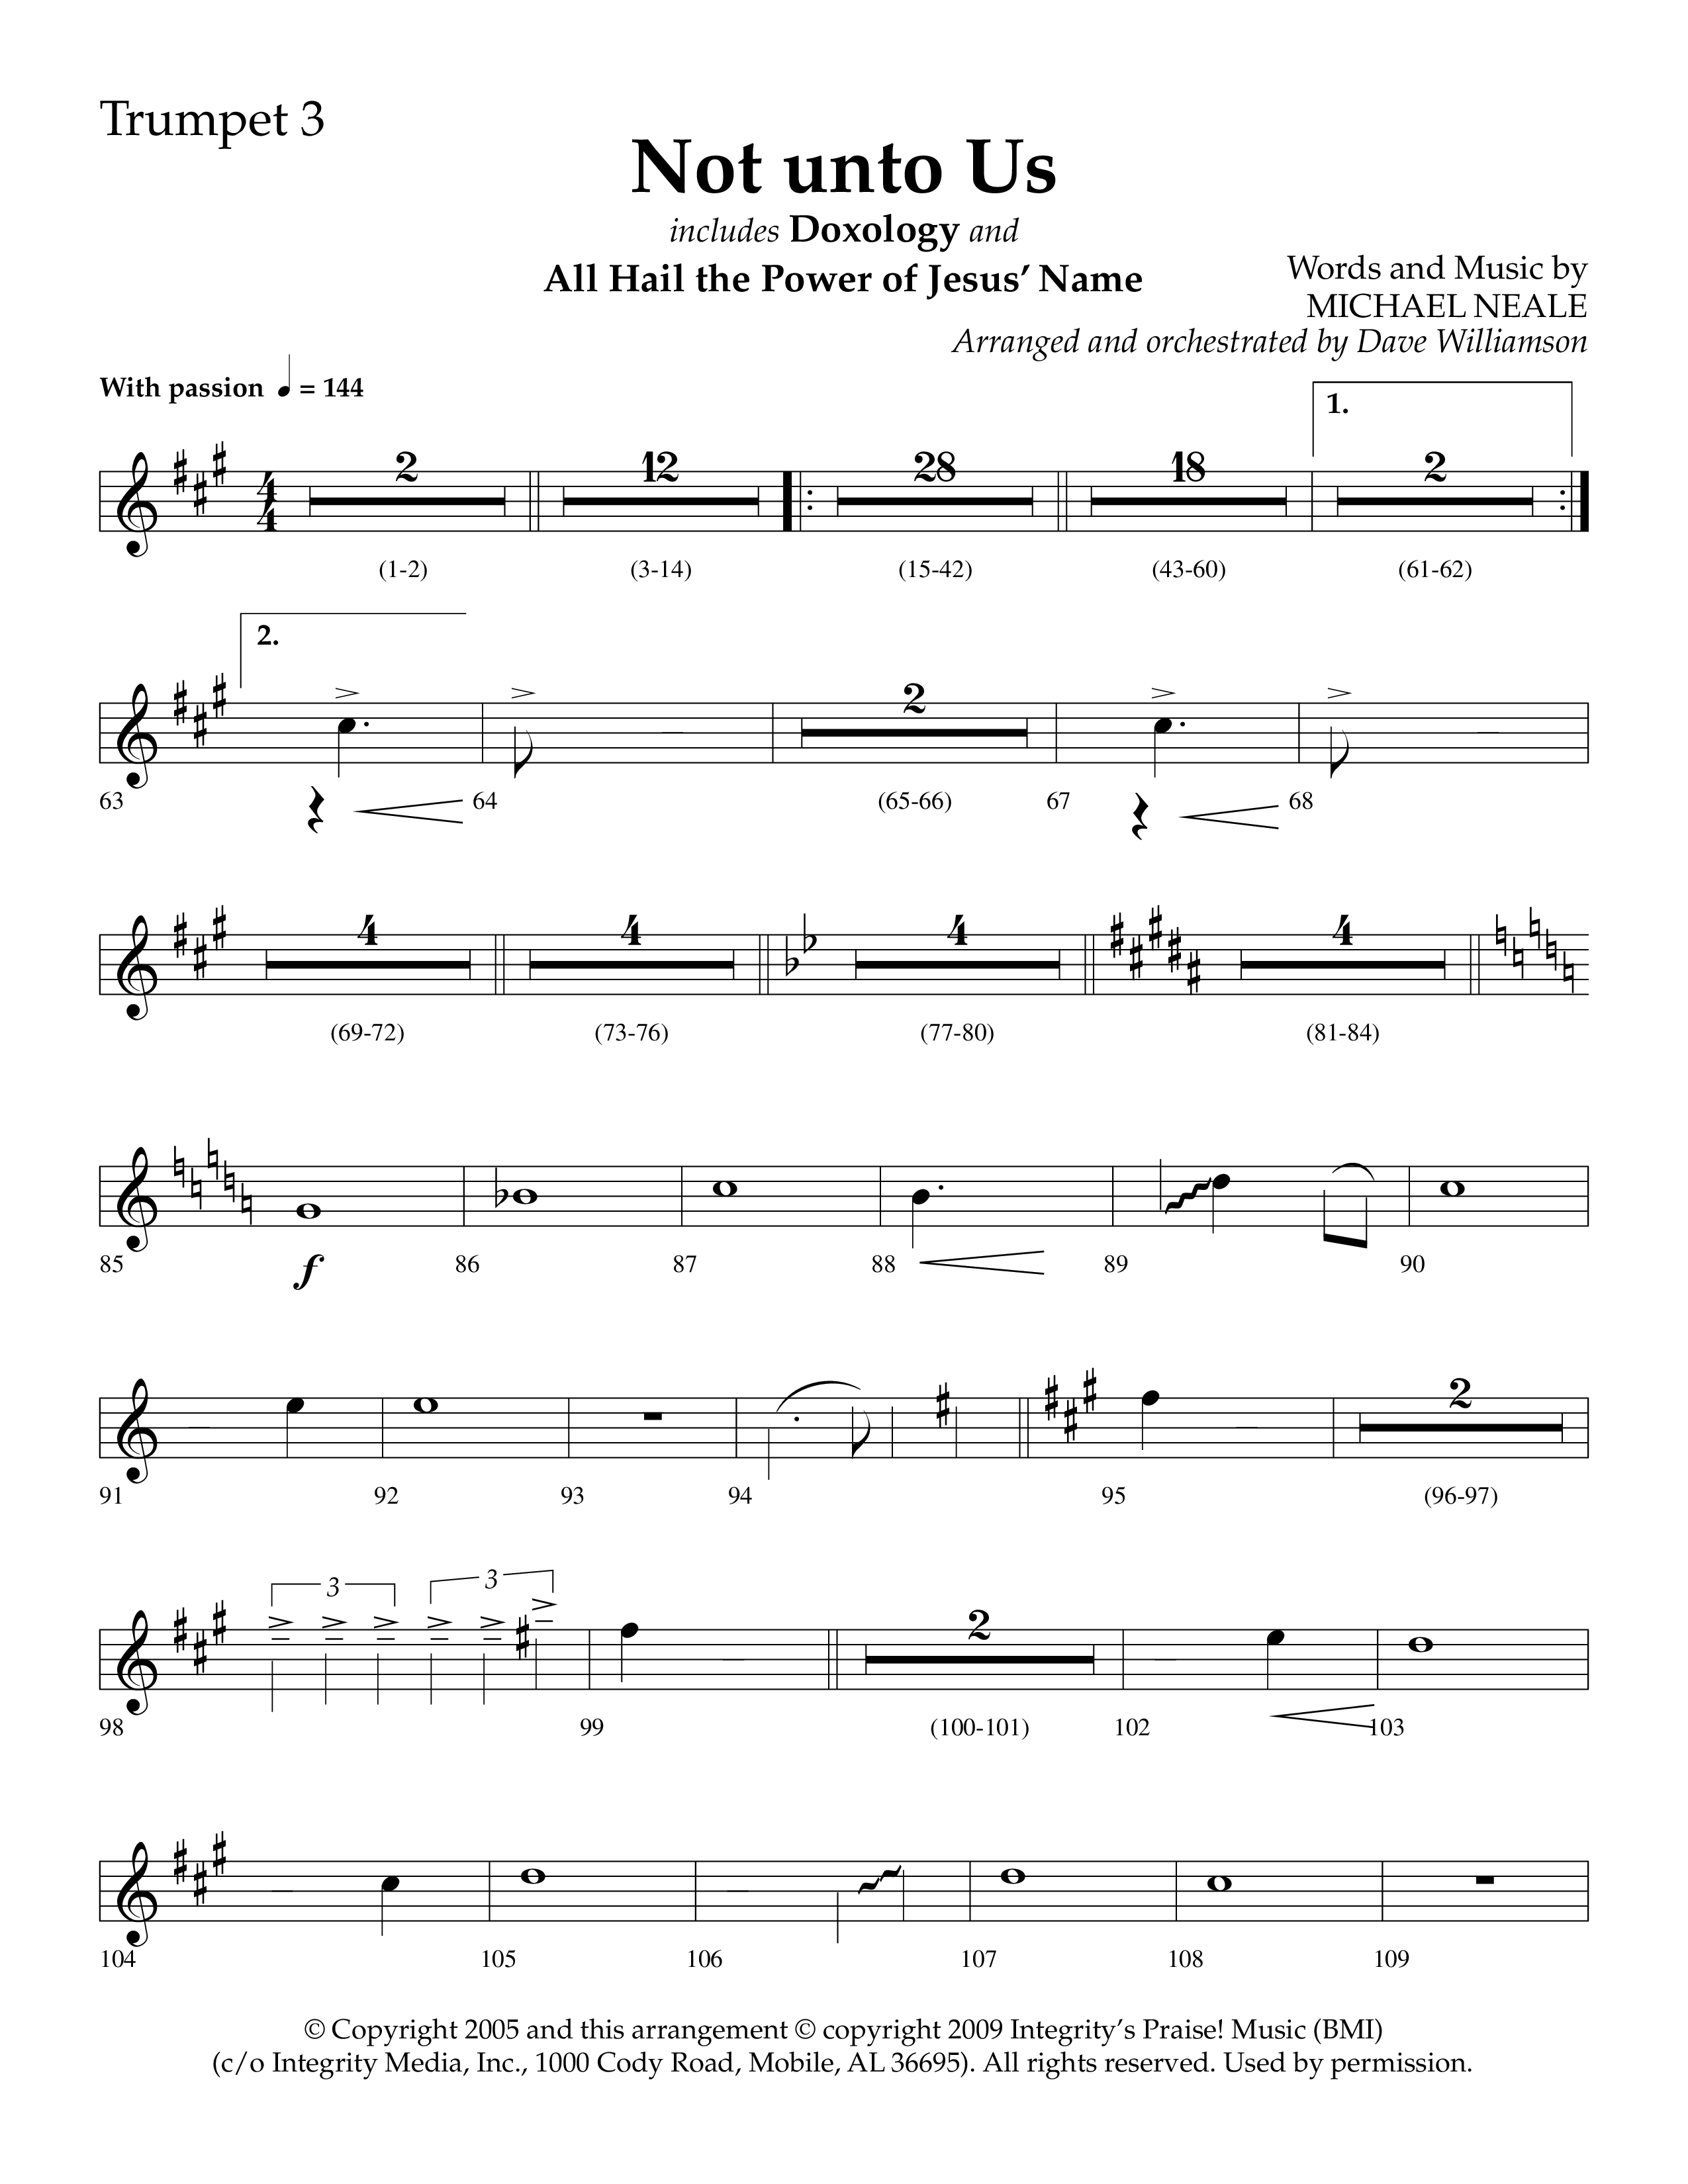 Not Unto Us (with Doxology, All Hail The Power Of Jesus Name) (Choral Anthem SATB) Trumpet 3 (Lifeway Choral / Arr. Dave Williamson)